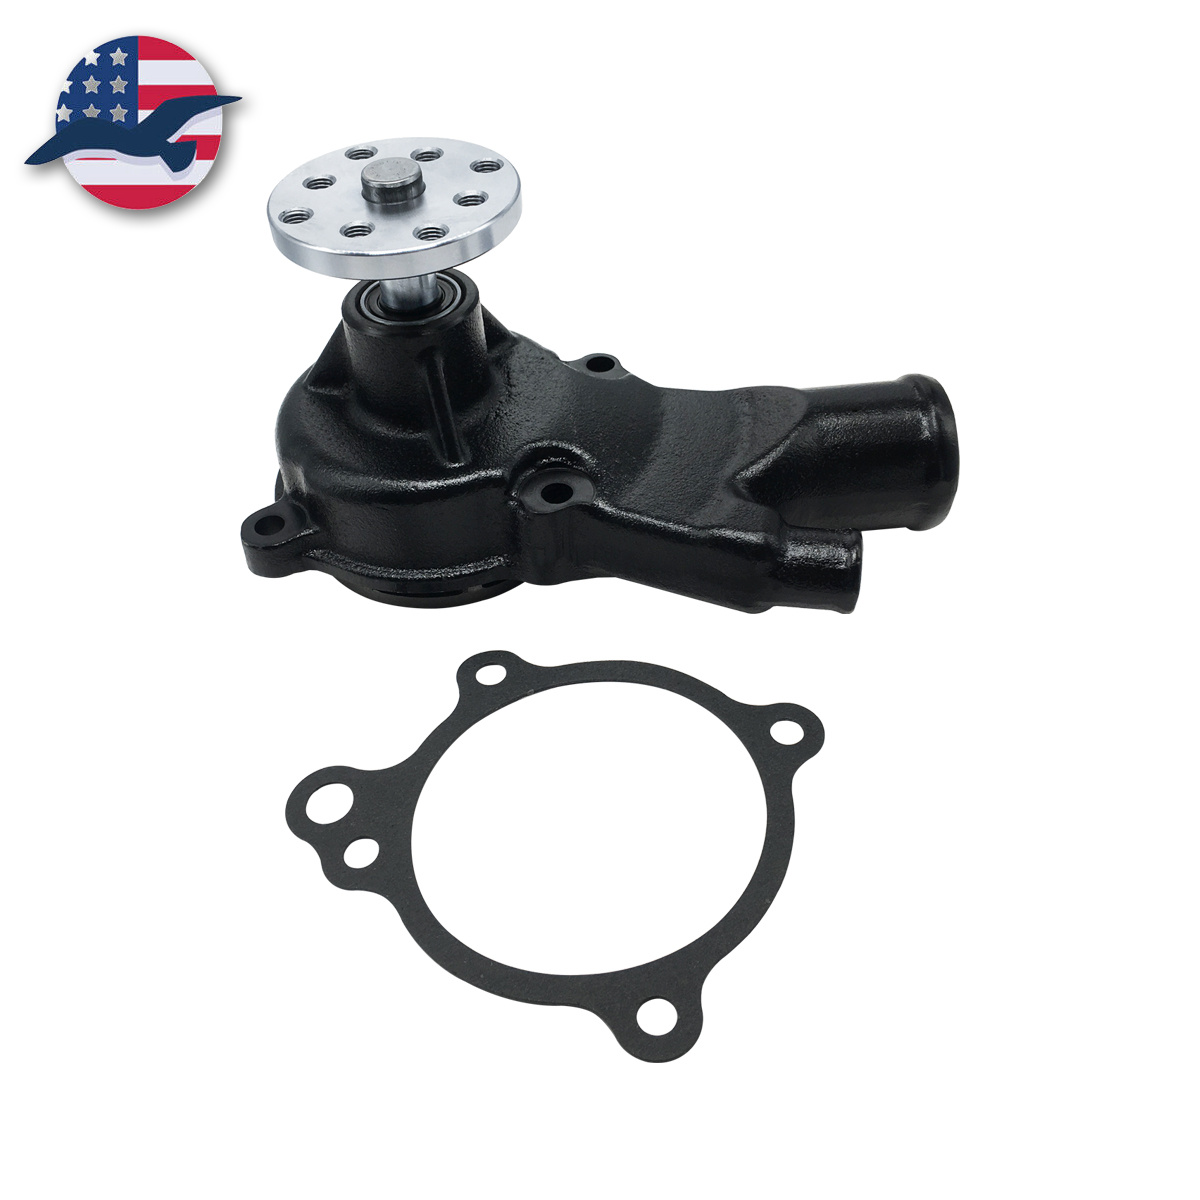 New Water Circulating Pump With Gasket 2.5L 3.0L 4.0L 3854017 18-3575 65142A1 884727 814755 